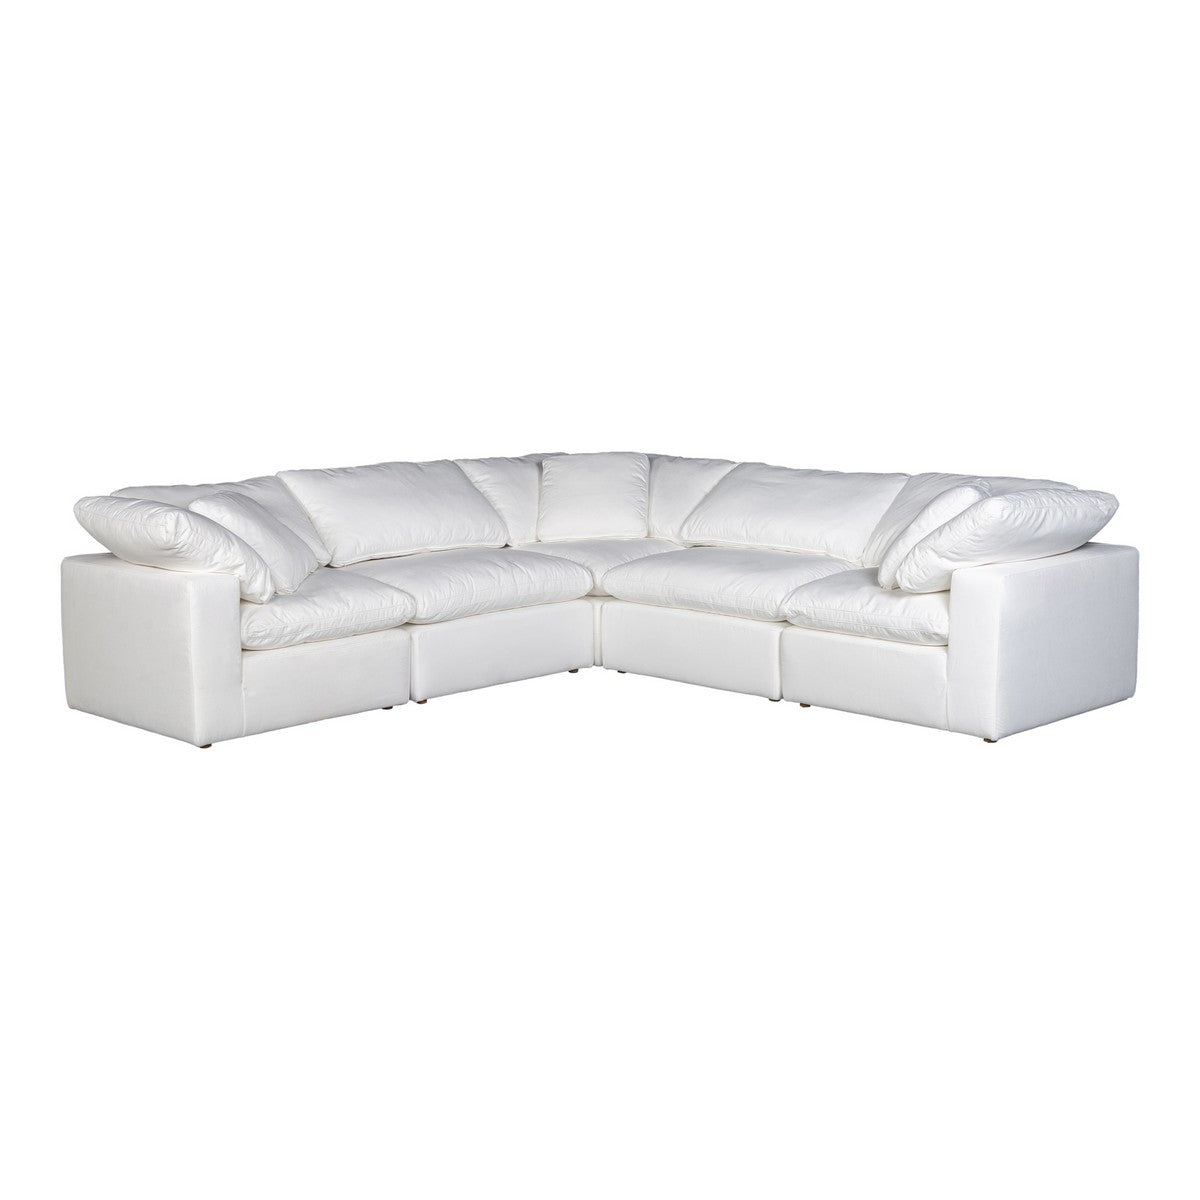 Moe's Home Collection Clay Classic L Modular Sectional Livesmart Fabric Cream - YJ-1010-05 - Moe's Home Collection - Extras - Minimal And Modern - 1